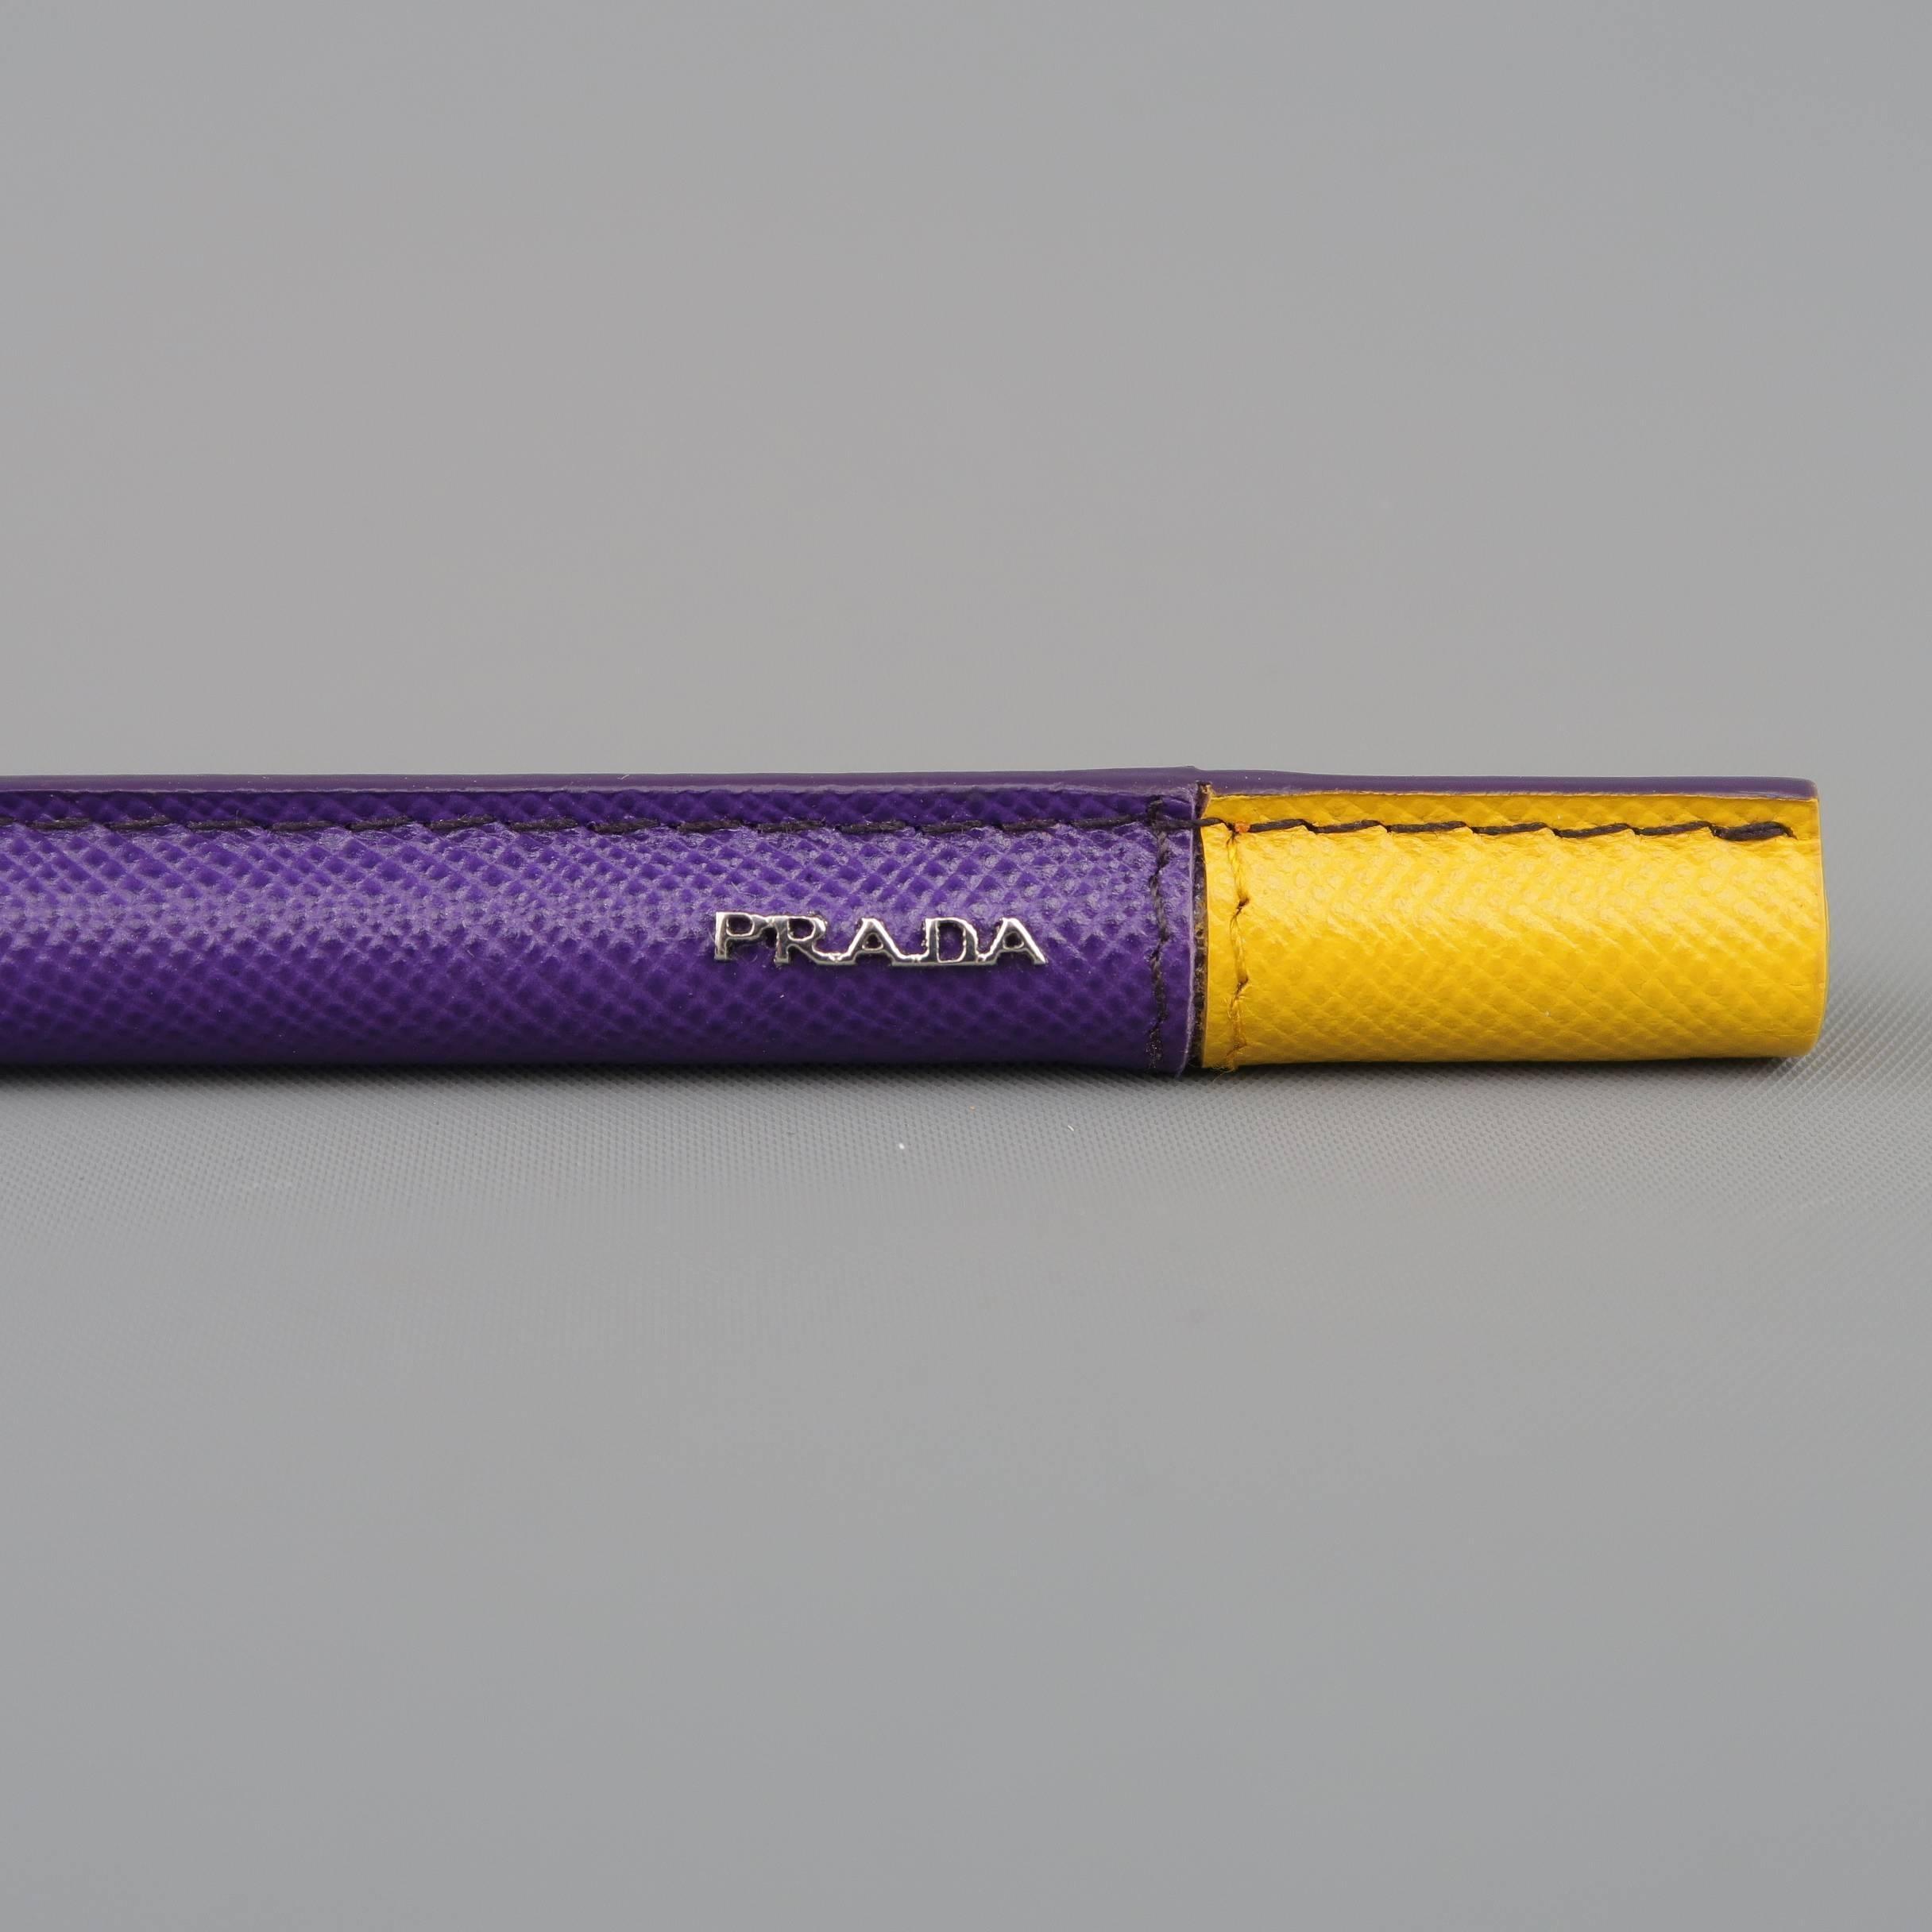 PRADA blue ink pen comes in purple and yellow textured leather and features a silver tone metal cap and logo. Small imperfection. As is. With box and extra ink.
 
Good Pre-Owned Condition.
 
6 in. x 1 cm.
SKU: 85385